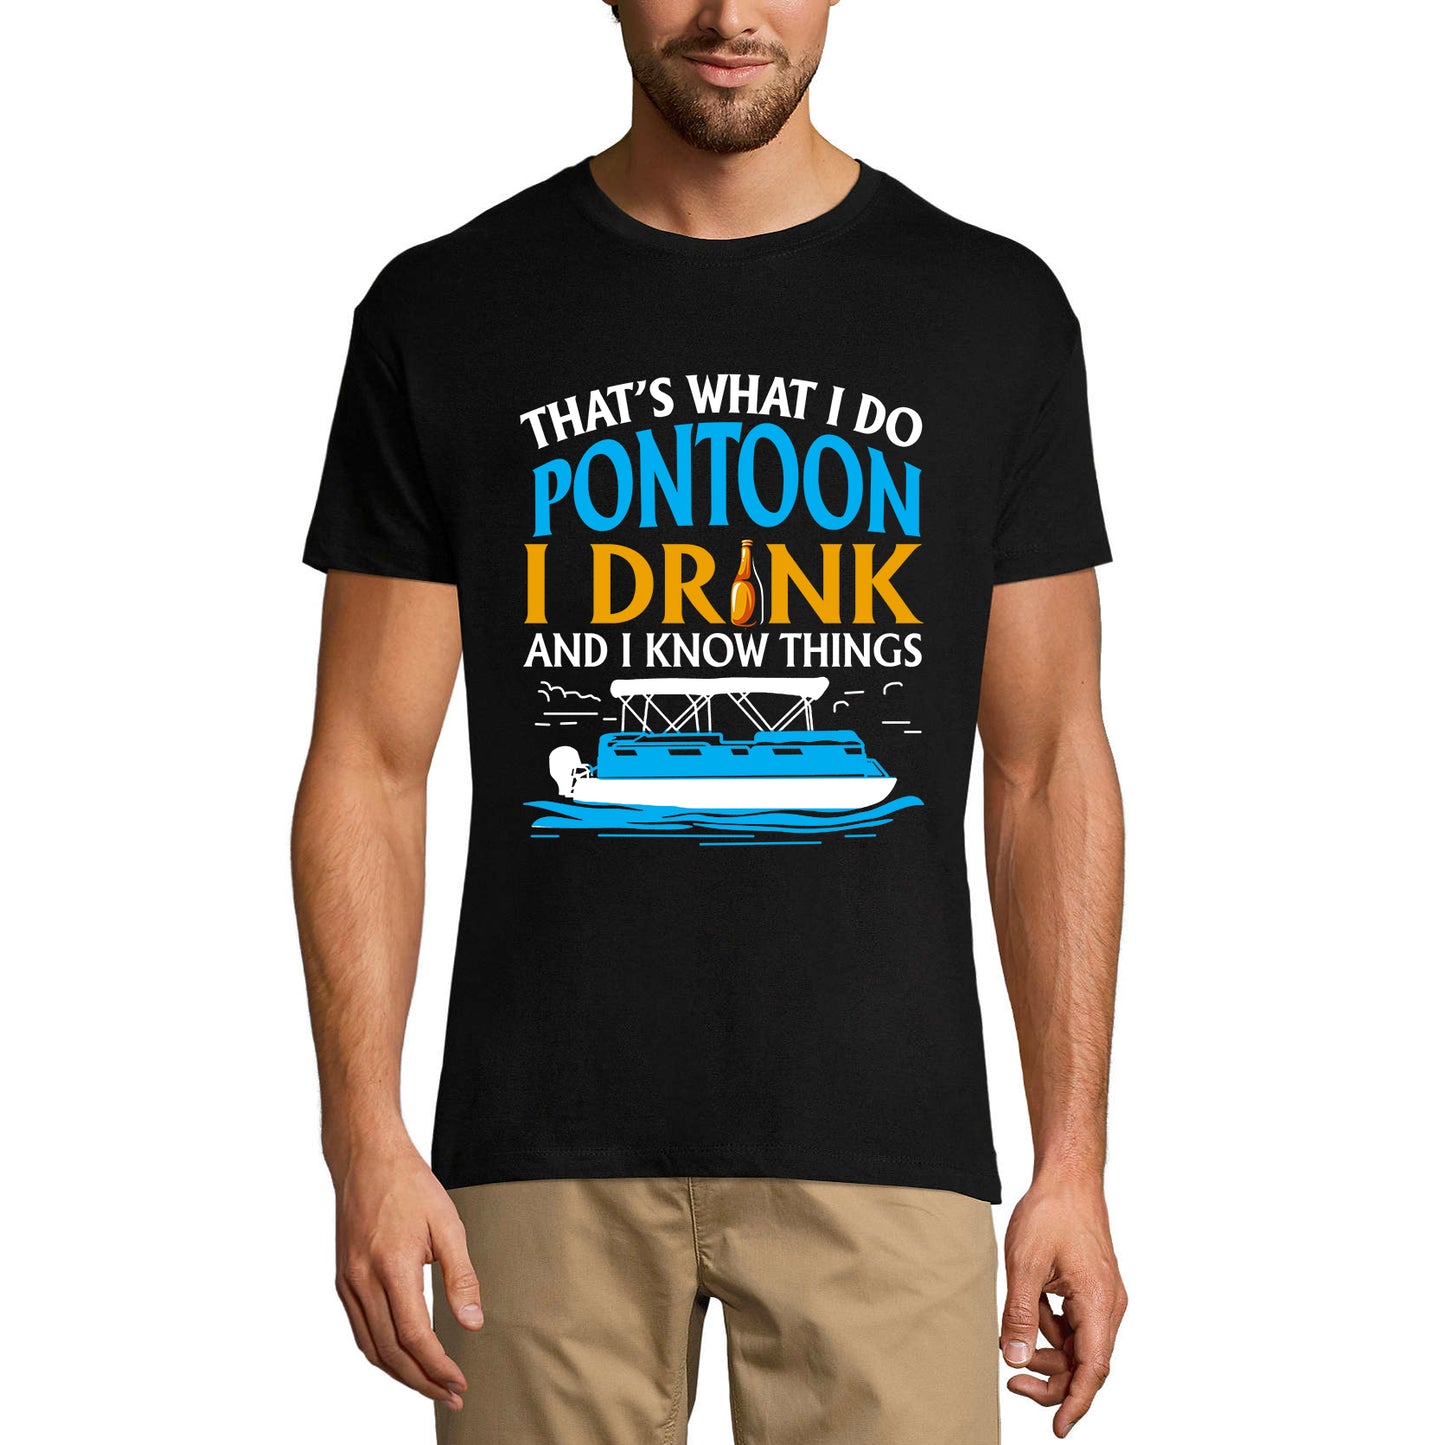 ULTRABASIC Men's Novelty T-Shirt That's What I Do Pontoon I Drink and I Know Things - Beer Lover Tee Shirt